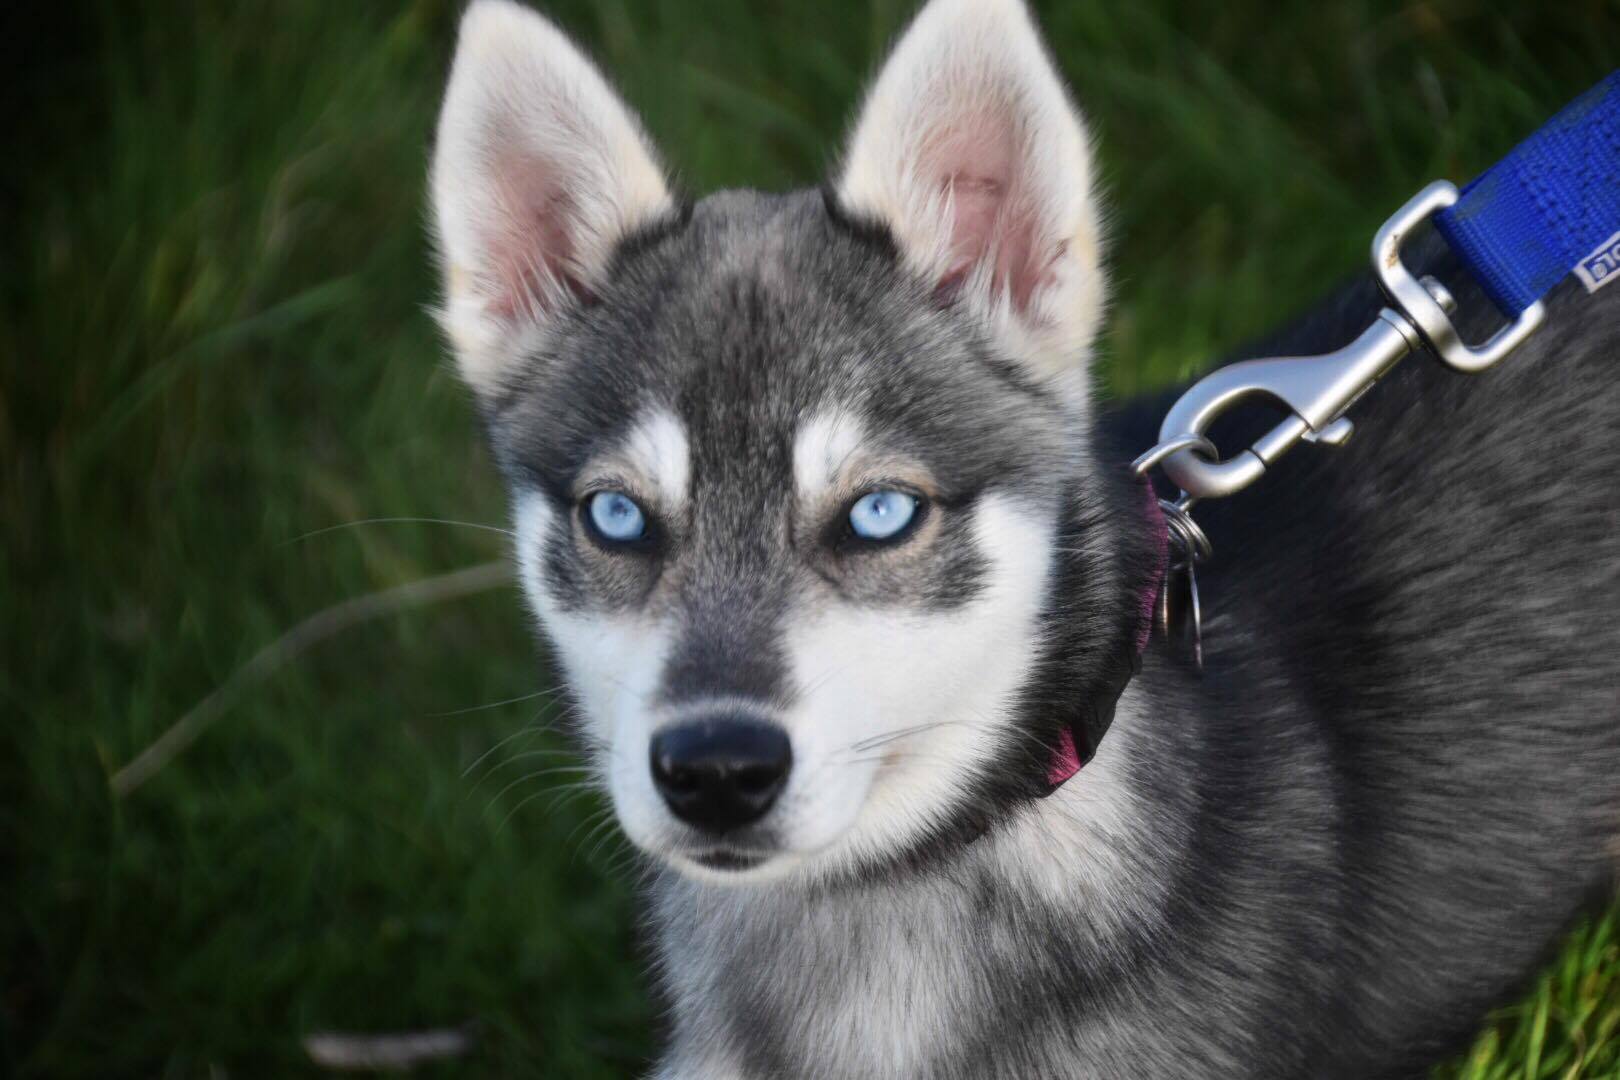 Ivy Winters | House of Klee Kai